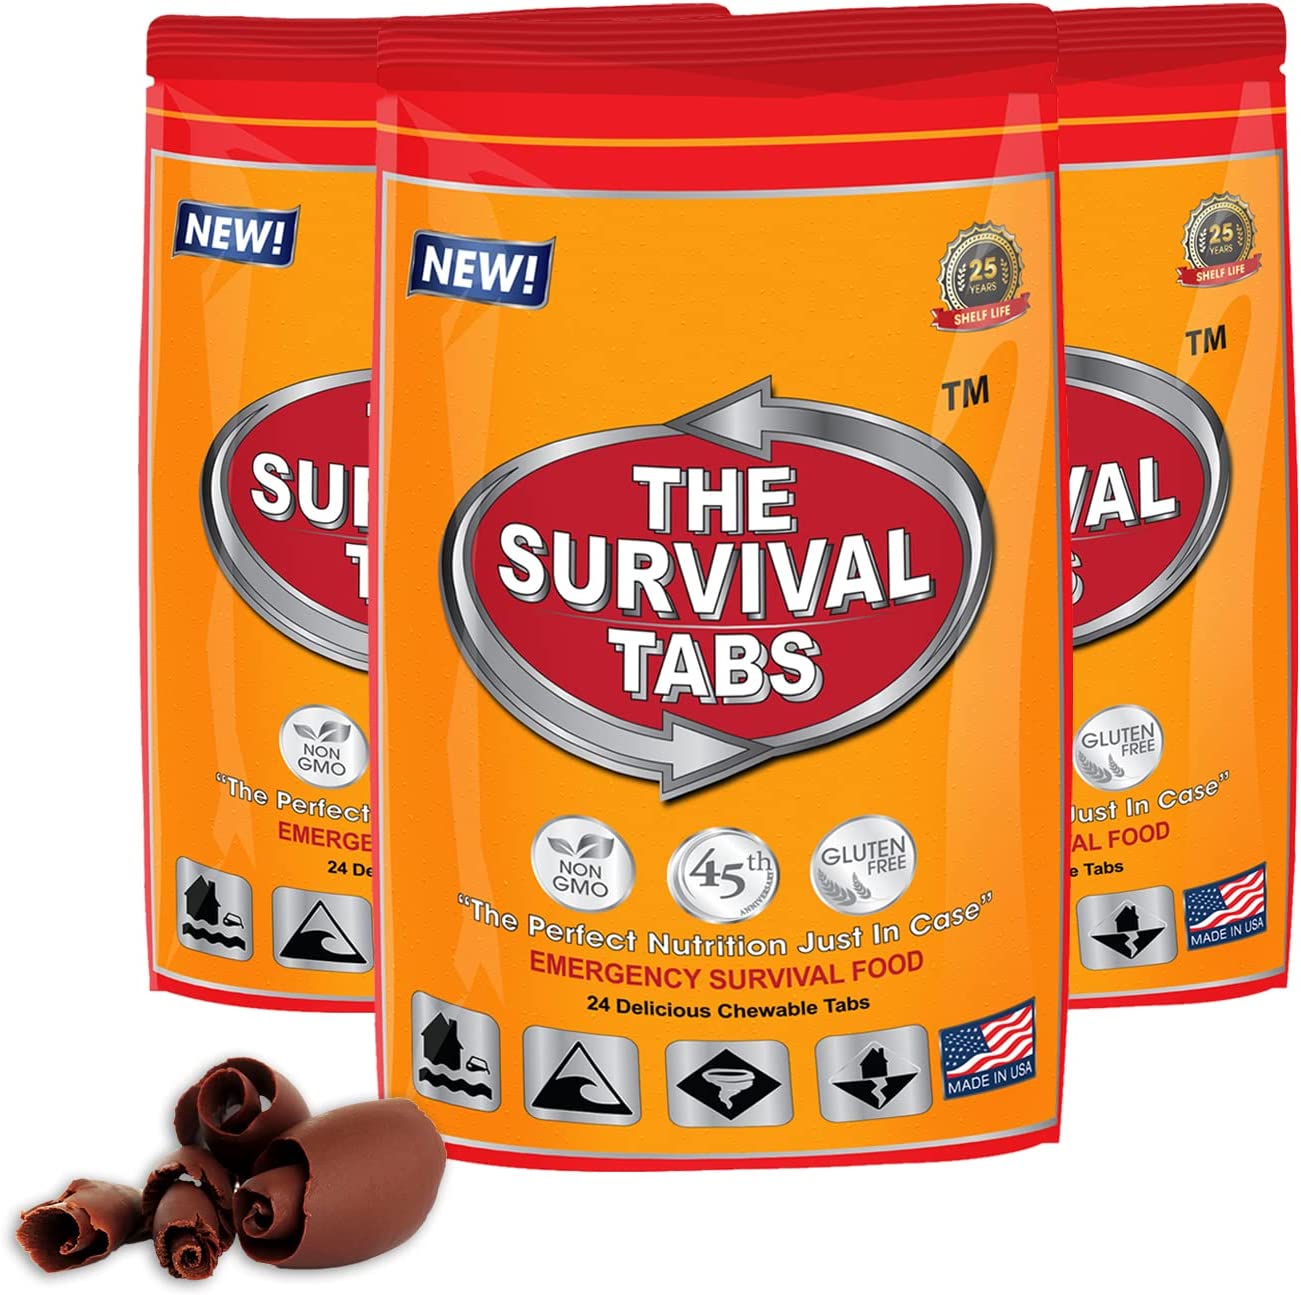 6 days Emergency Survival Tabs none-GMO gluten-free 25 years shelf life 24 Tabs Chocolate x 3 pouches